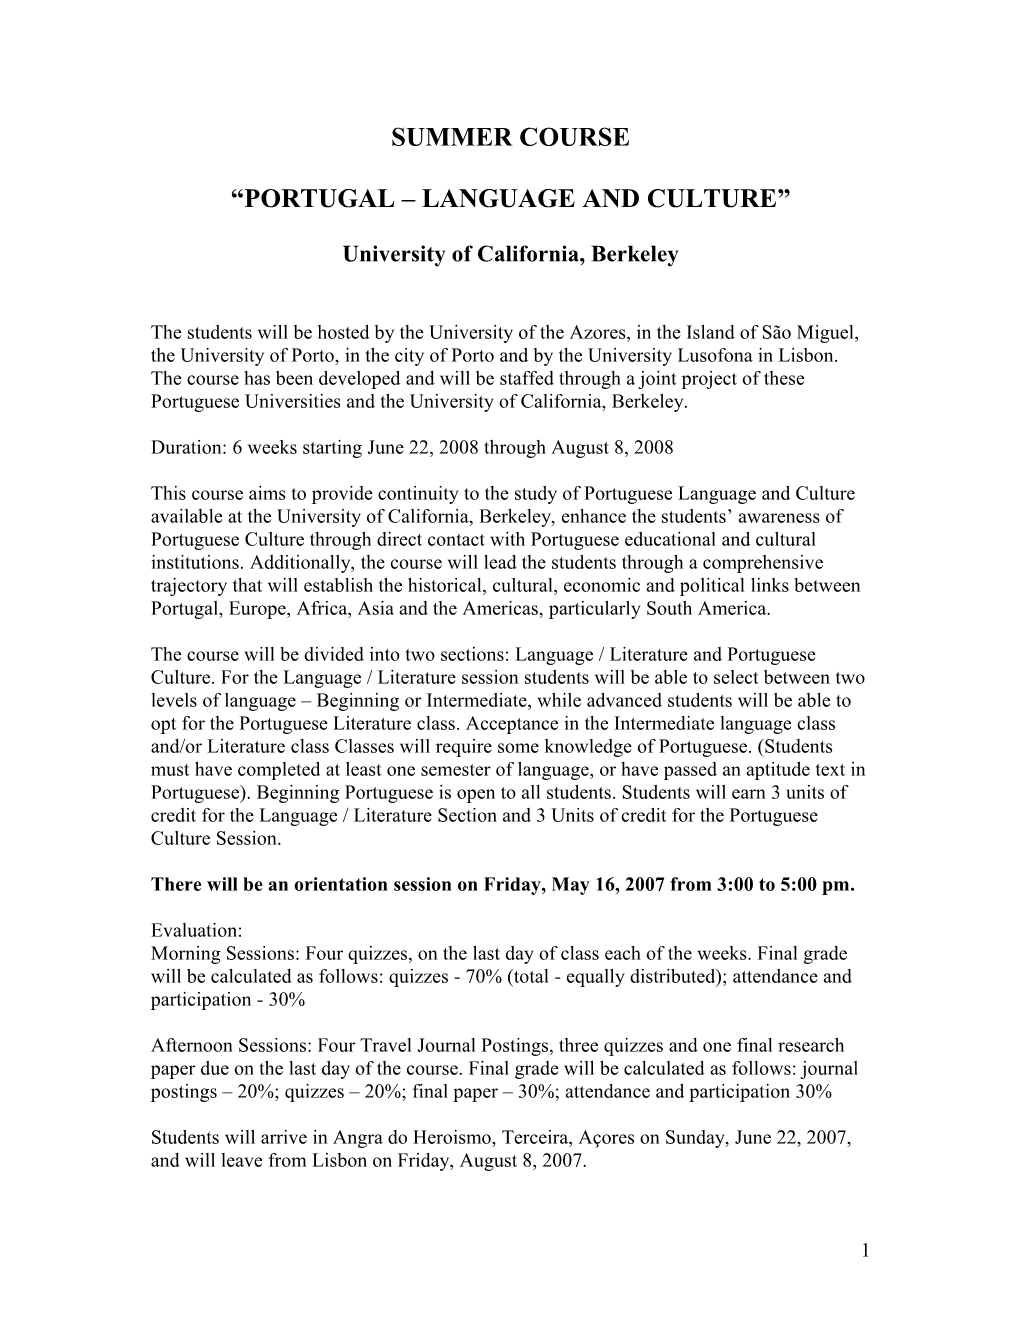 Portugal Language and Culture